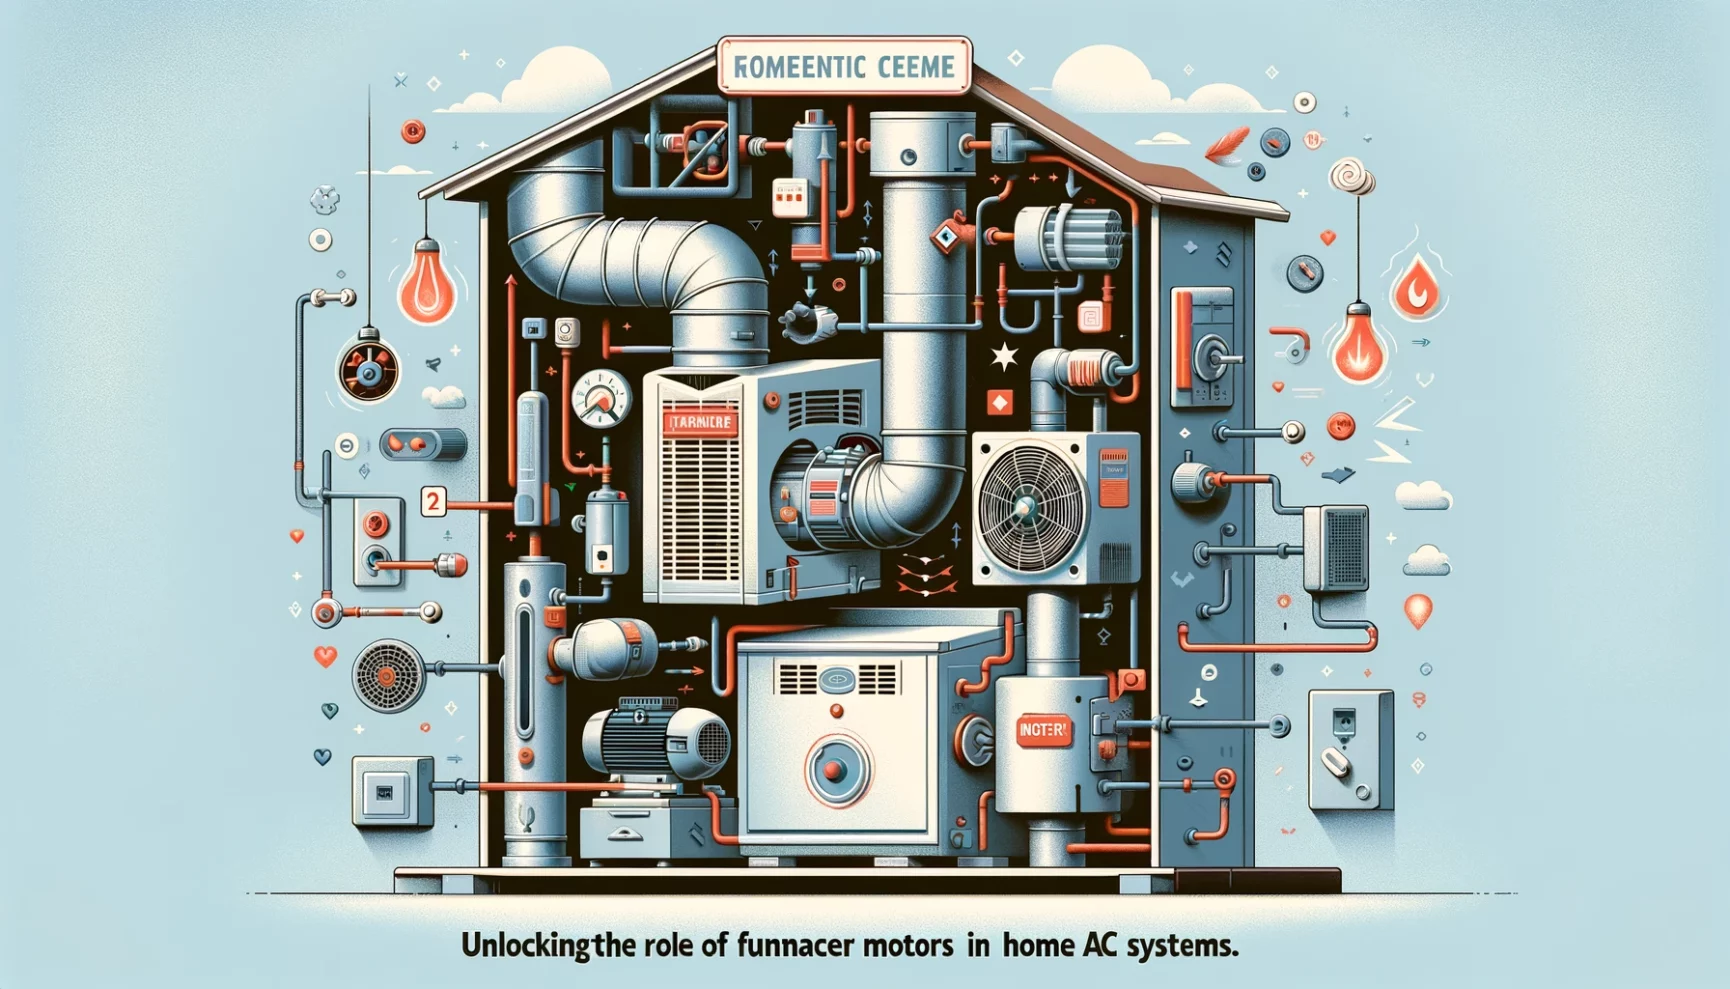 Exploded view illustration of a home air conditioning system, detailing its internal components and mechanics.